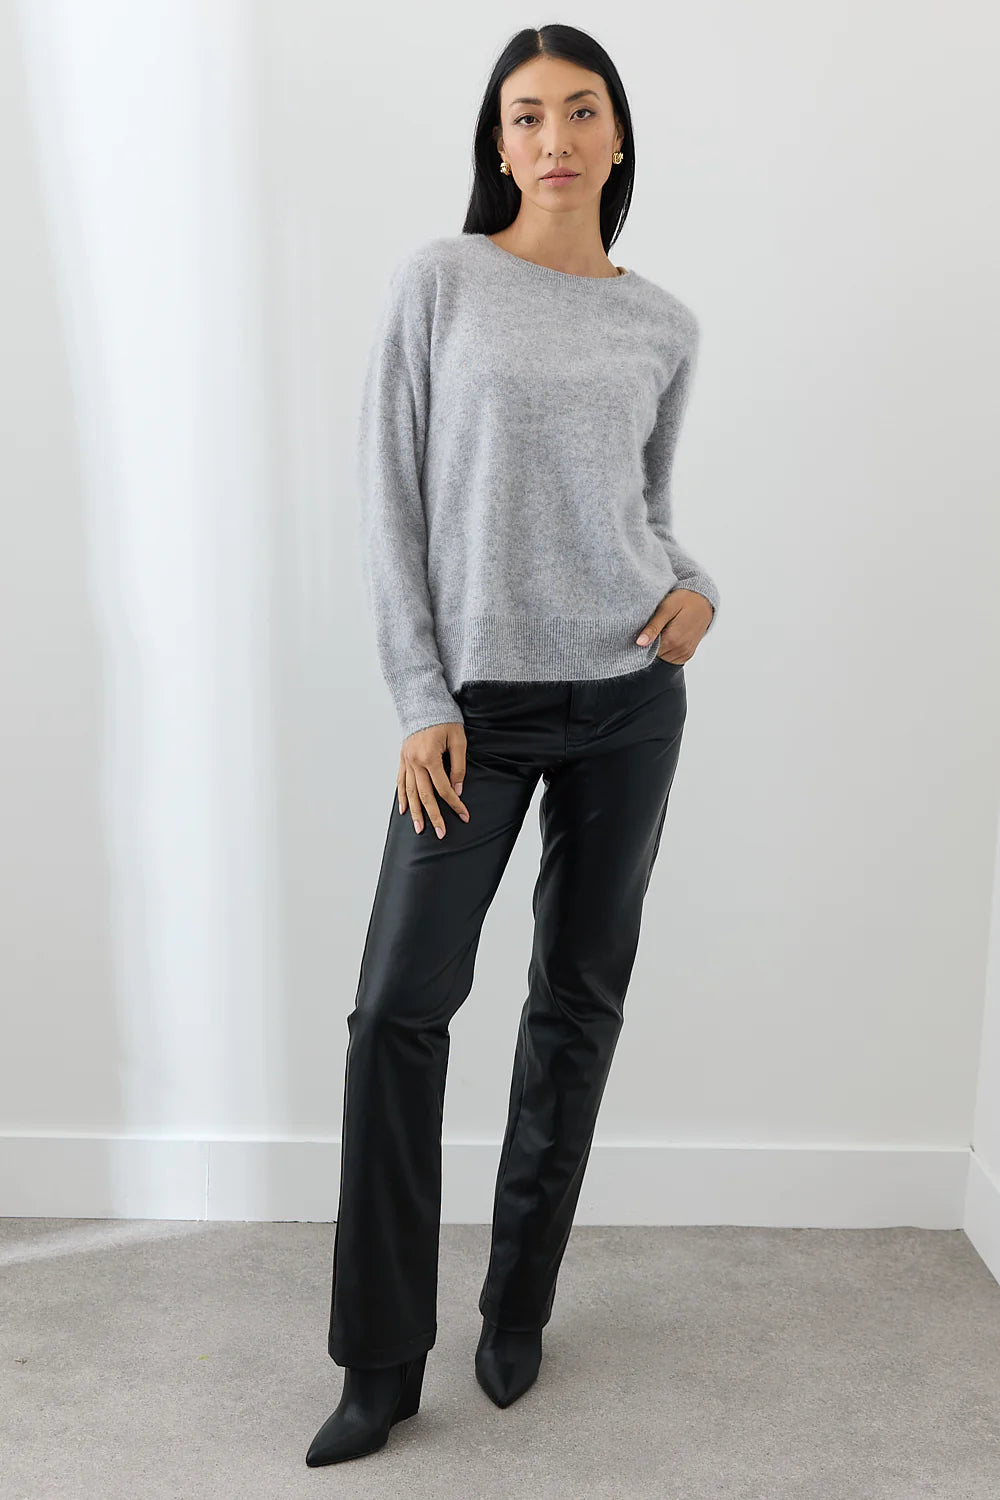 Cyra Sweater in Silver by Mia Fratino